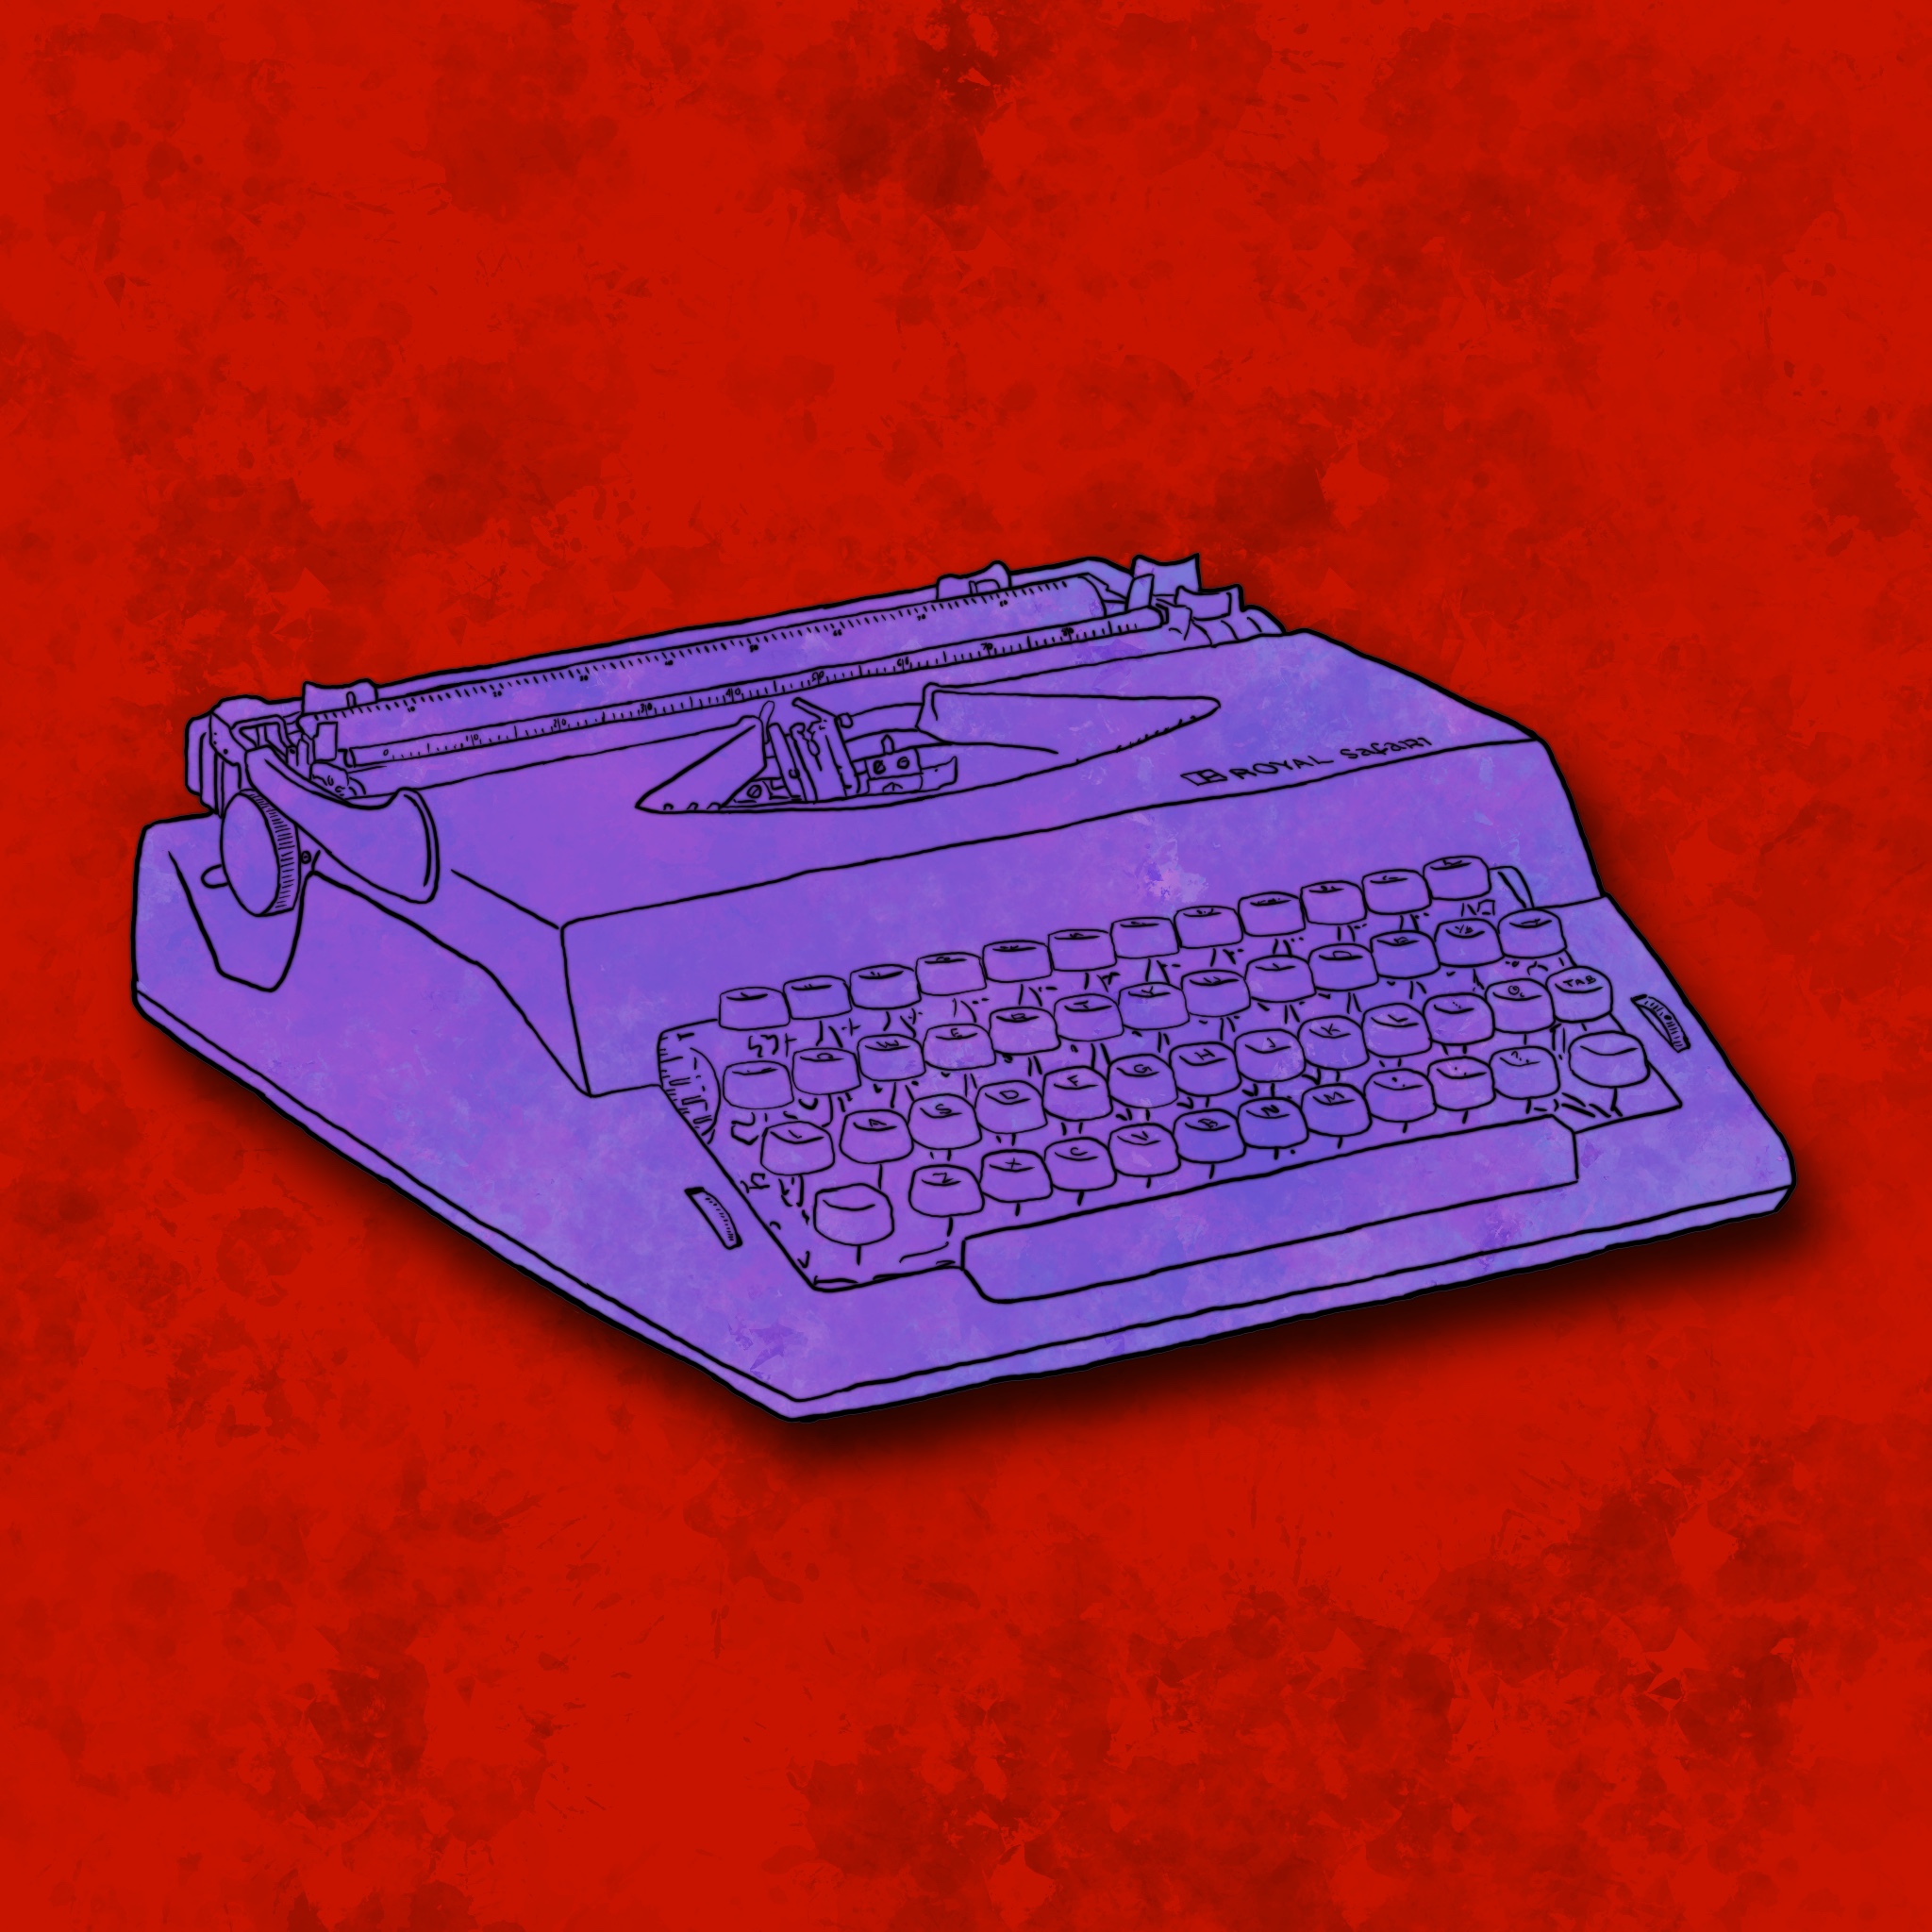 A sketch done in Procreate of a typewriter.